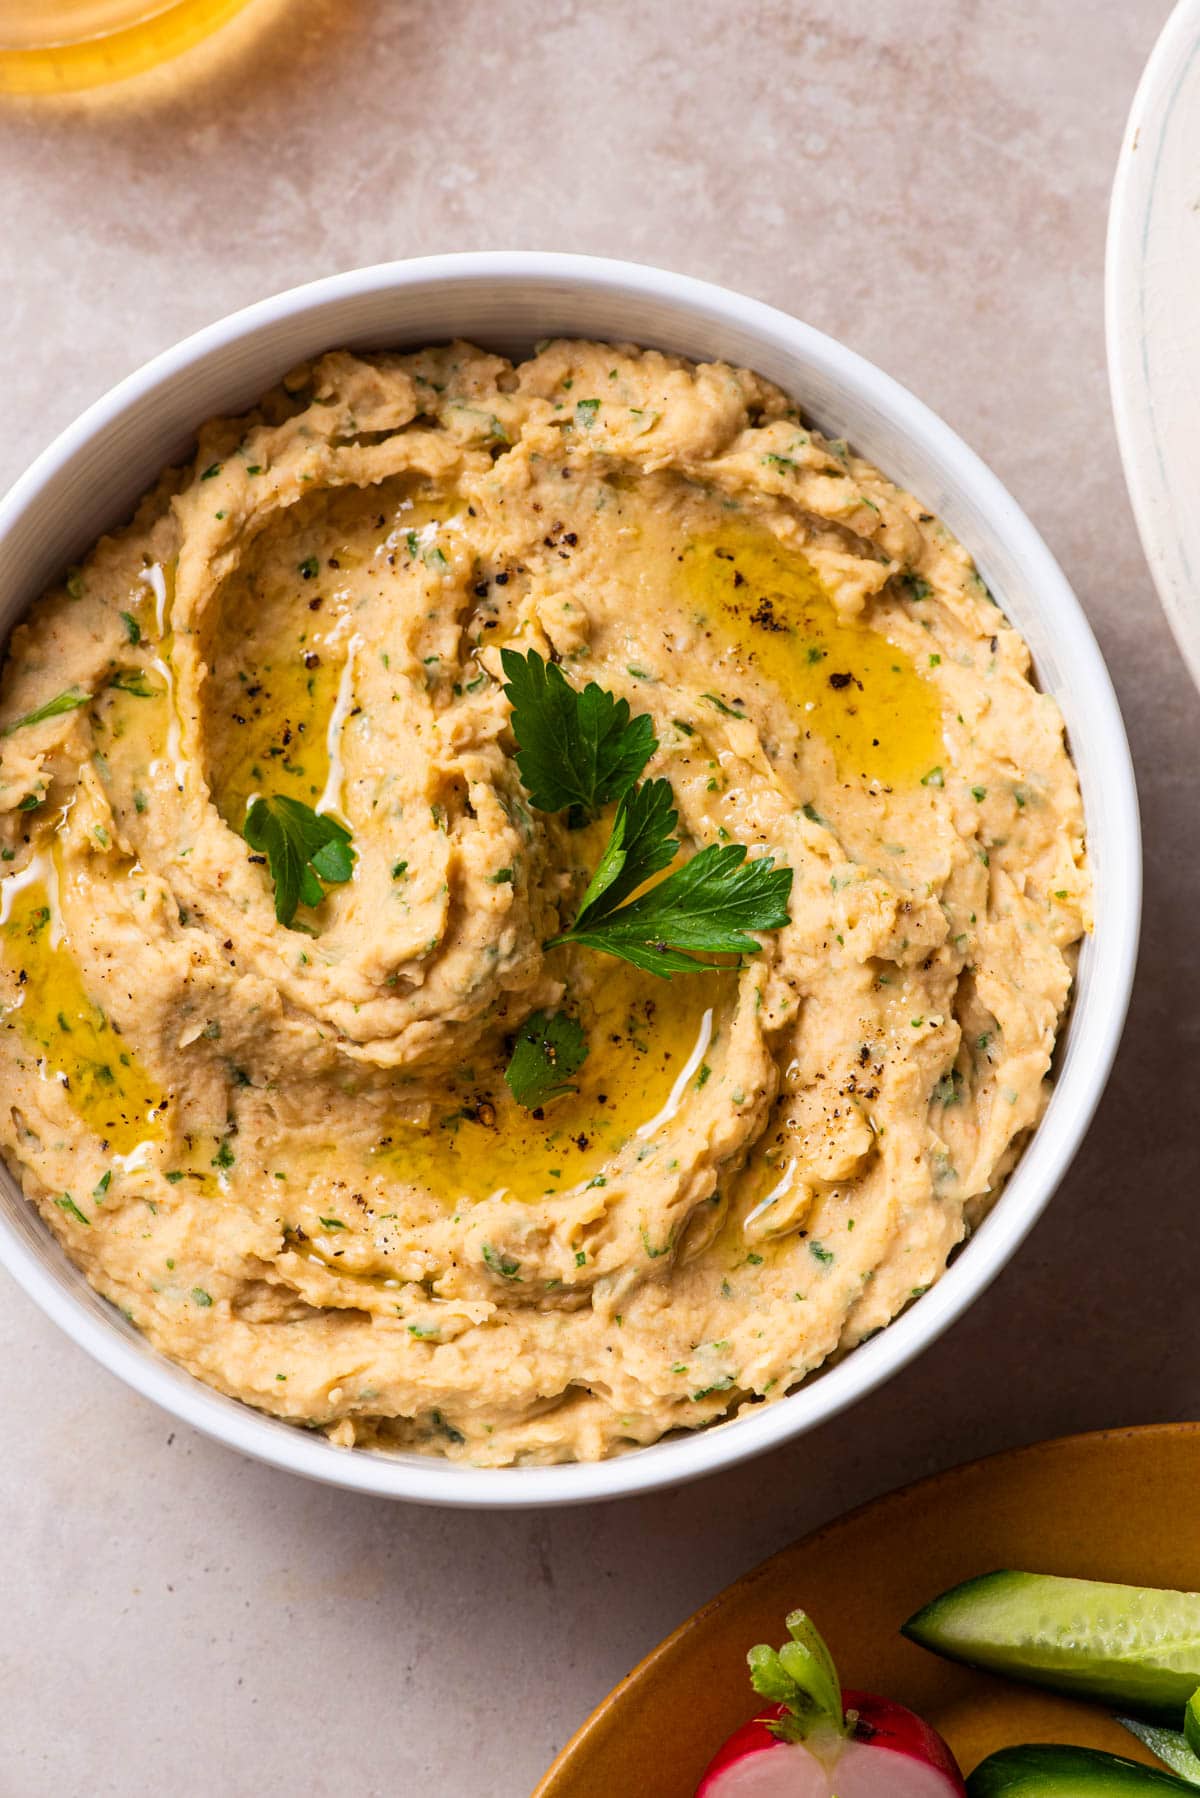 White bean dip garnished with olive oil and parsley.